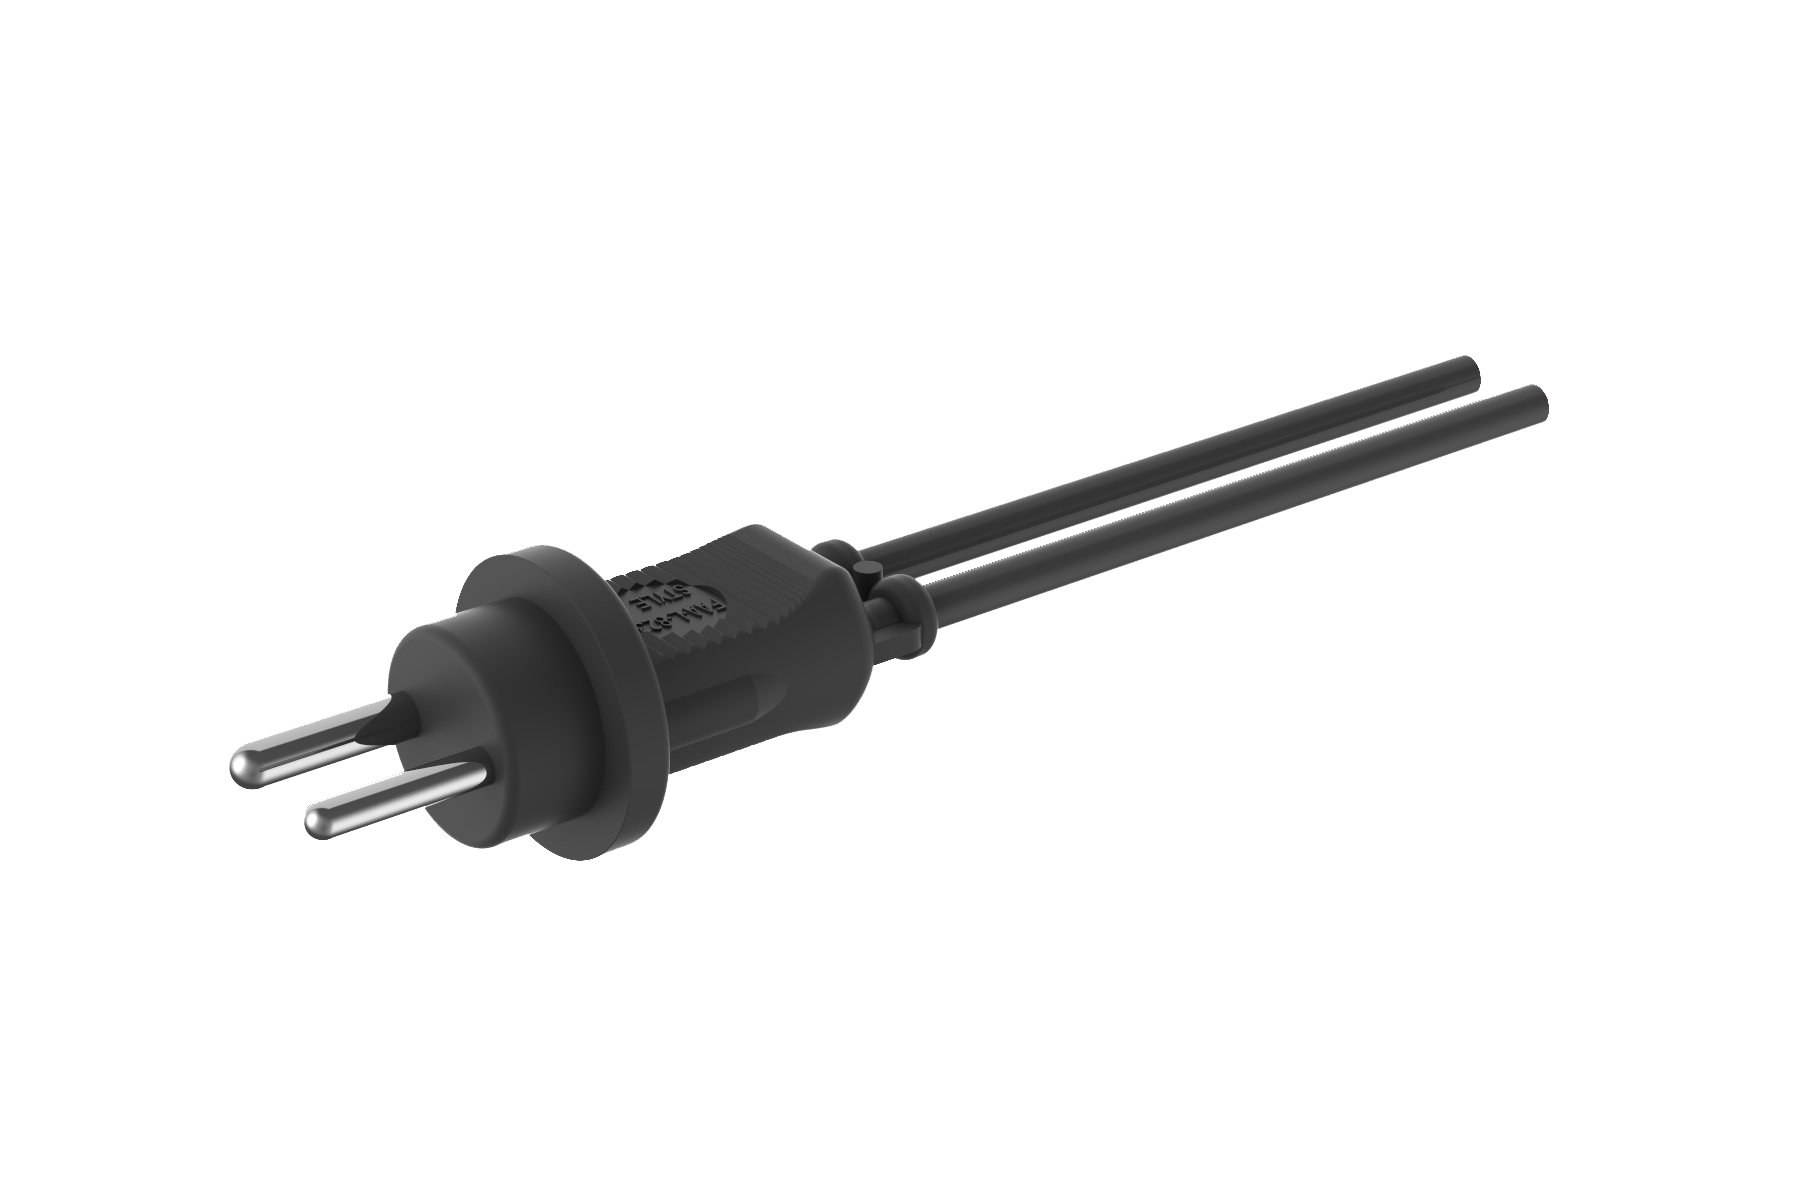 KDC506, Style 6, Prefabricated secondary lead with two single core wires (png)